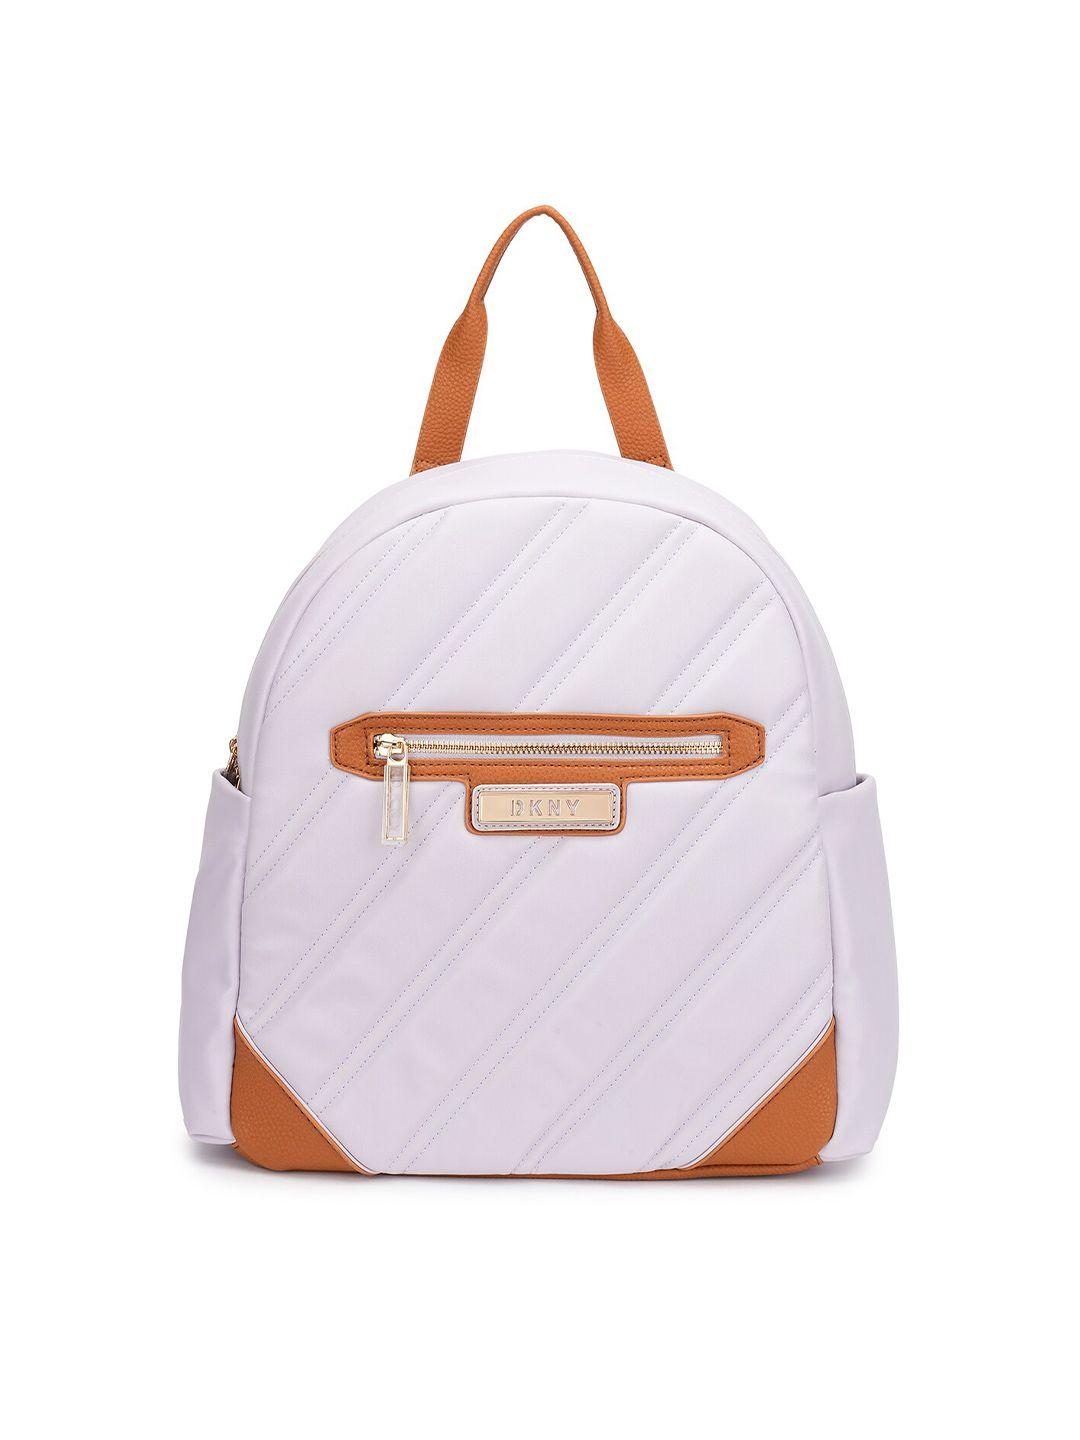 dkny bias polyester material soft backpack